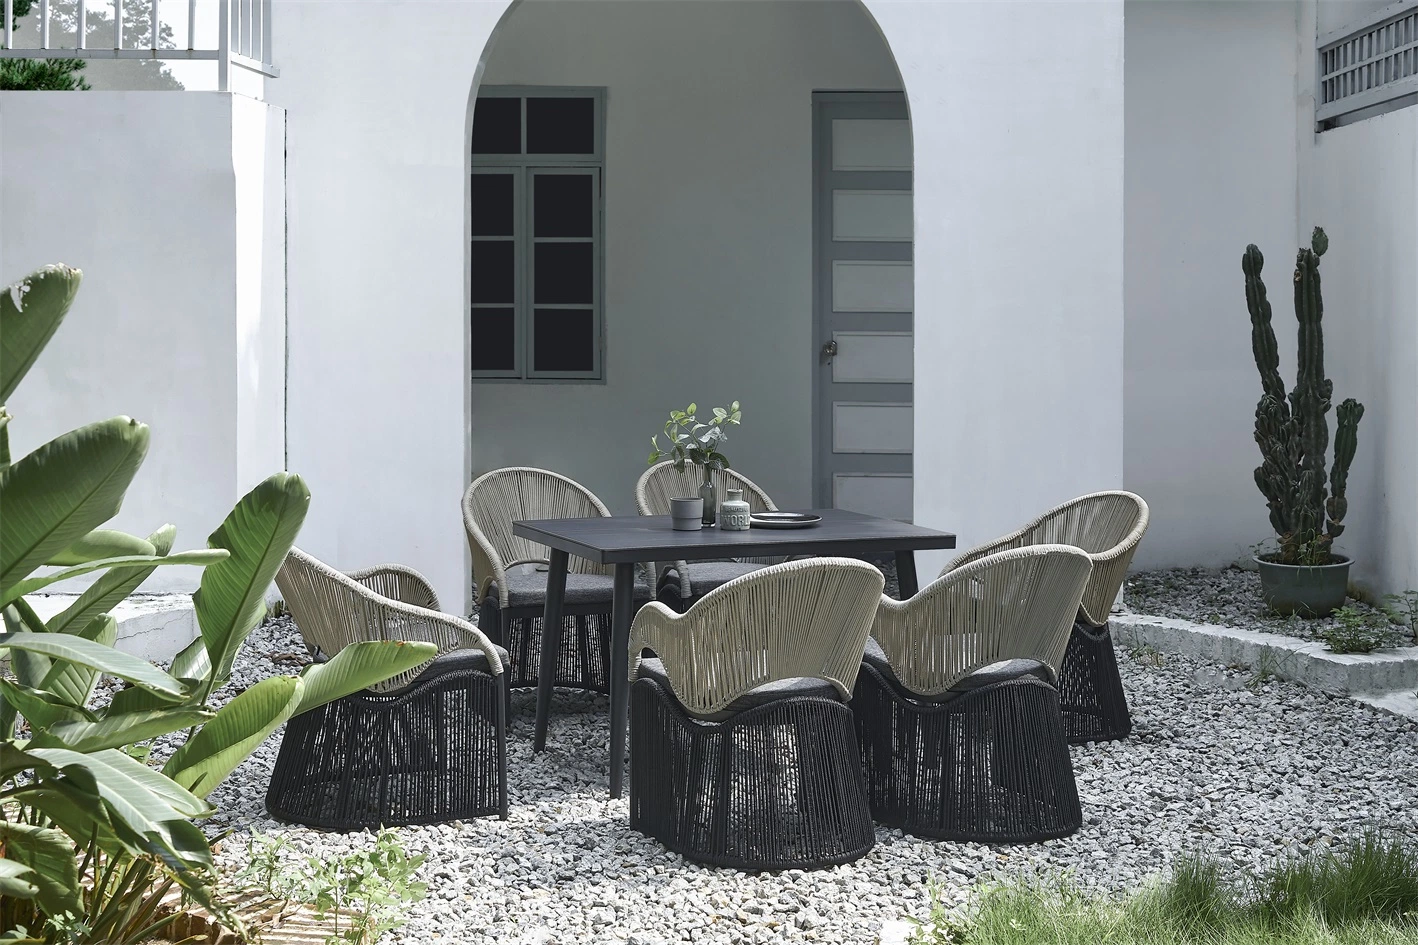 Hotel Aluminum Frame Garden Dining Furniture Patio Rope Weaving Outdoor Furniture Dining Table Set